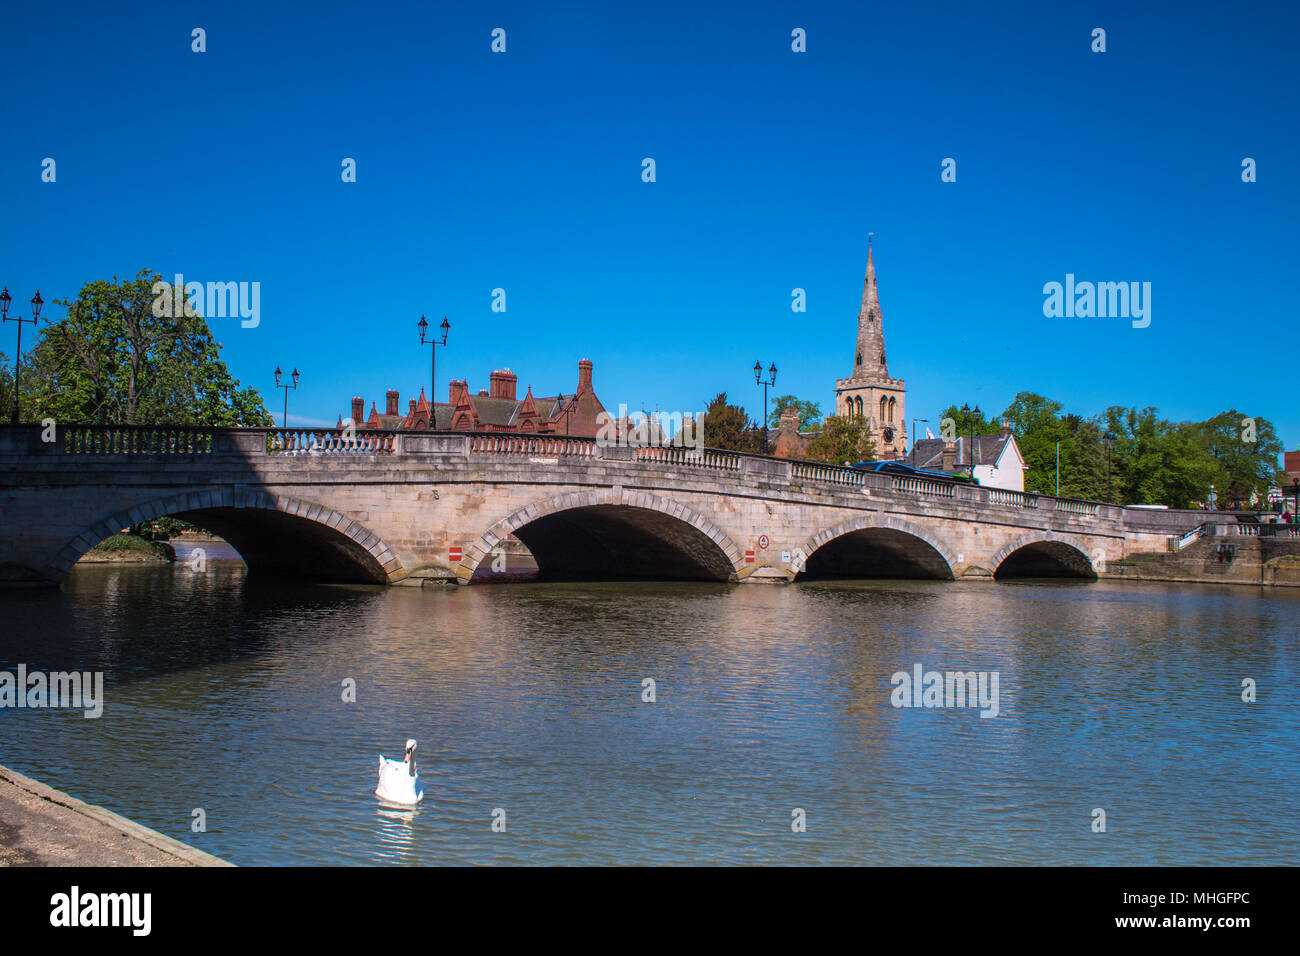 The River Great Ouse flows peacefully through Town Bridge in Bedford, UK, with the spire of St Paul's church in the background Stock Photo